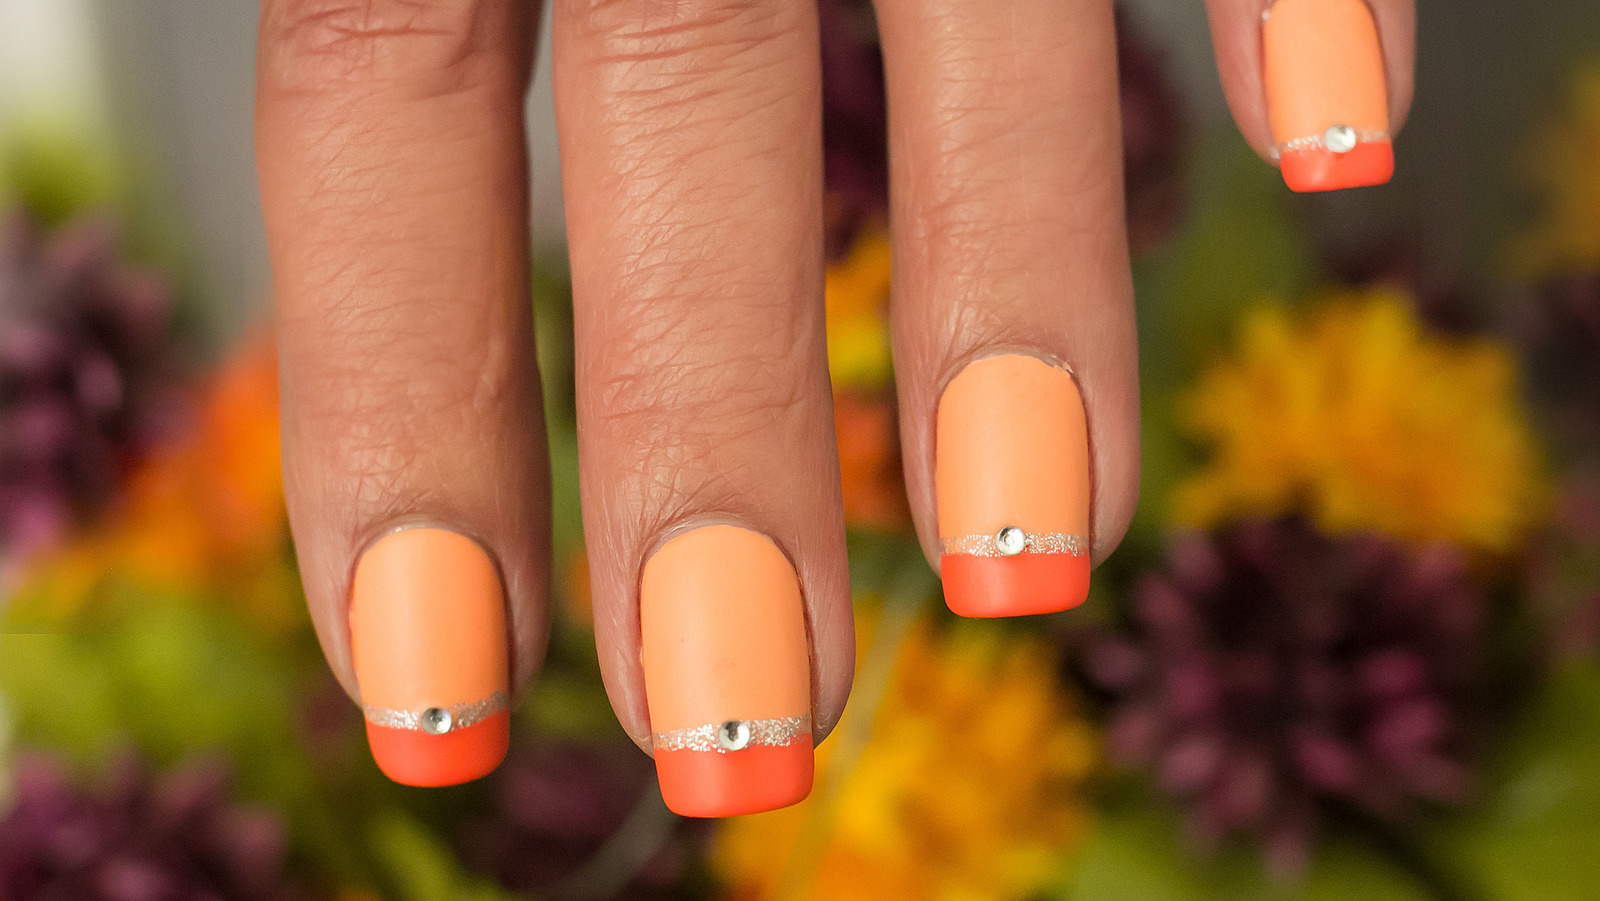 Creamsicle Nails Are The Dreamy Orange Mani Of The Summer